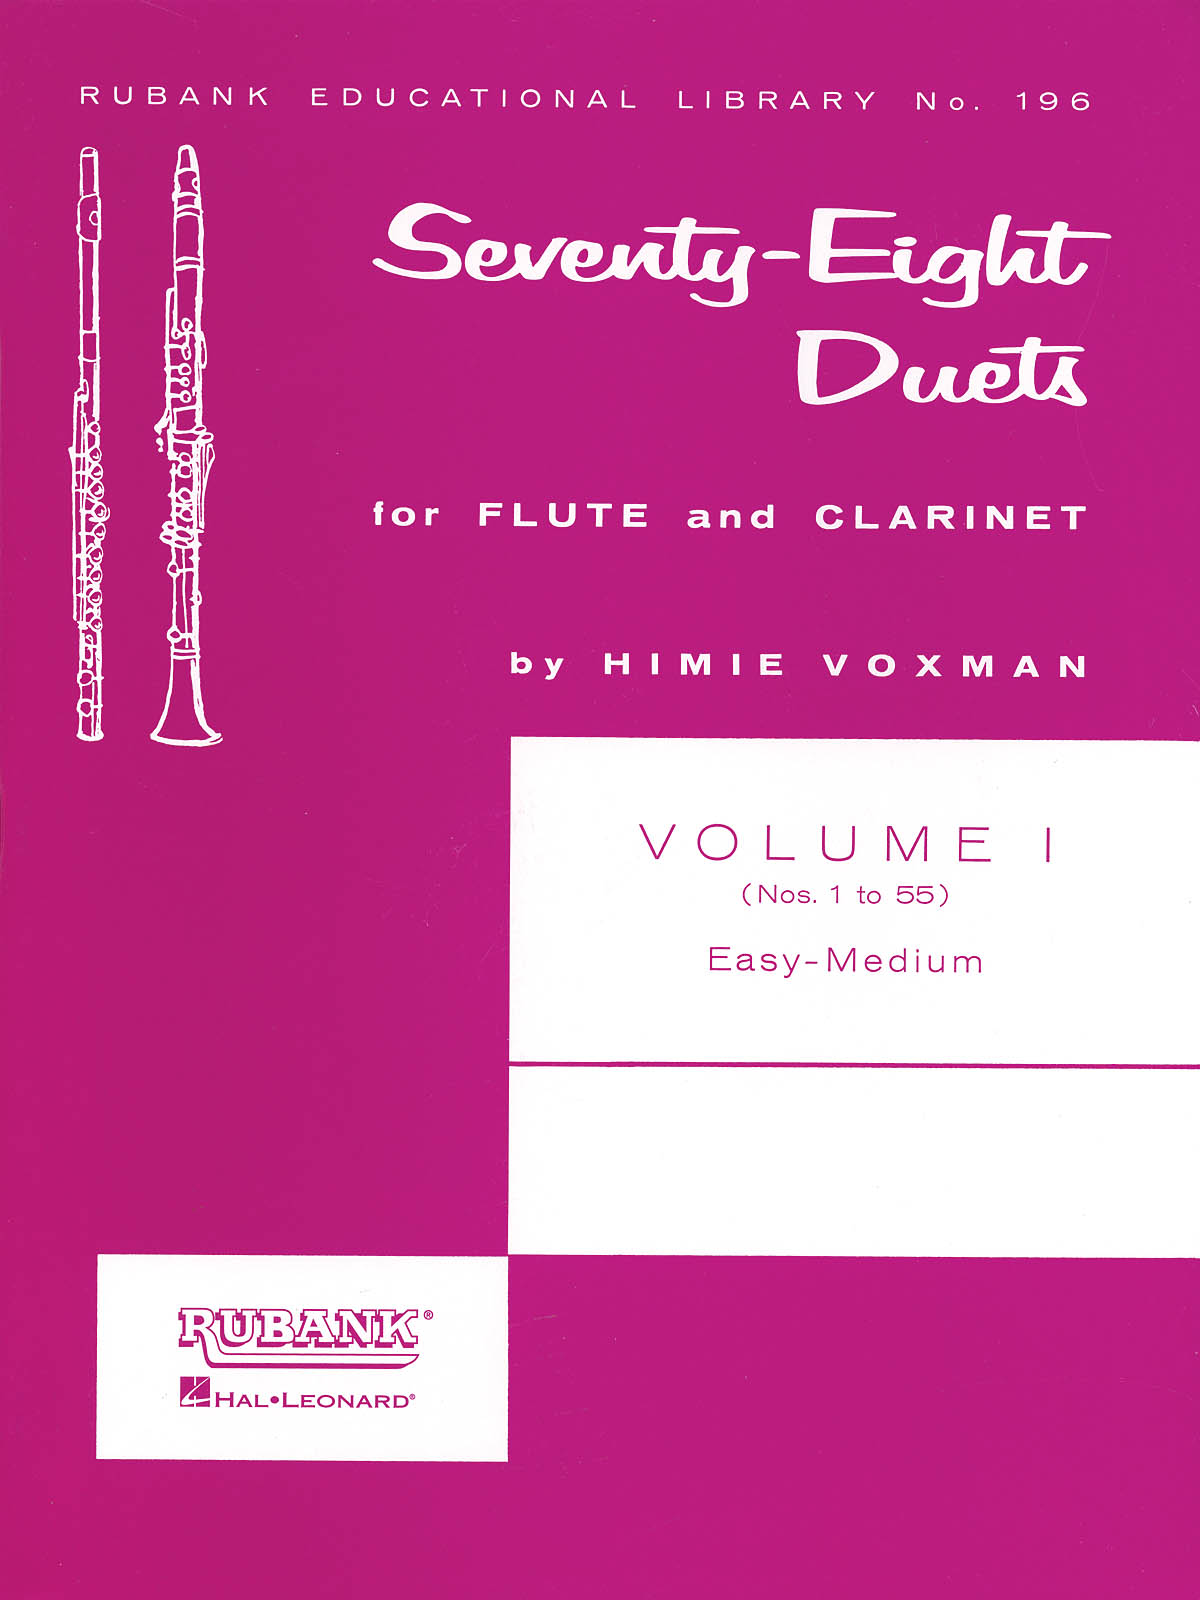 Voxman: 78 Duets for Flute and Clarinet Vol 1 (Nos. 1 to 55)